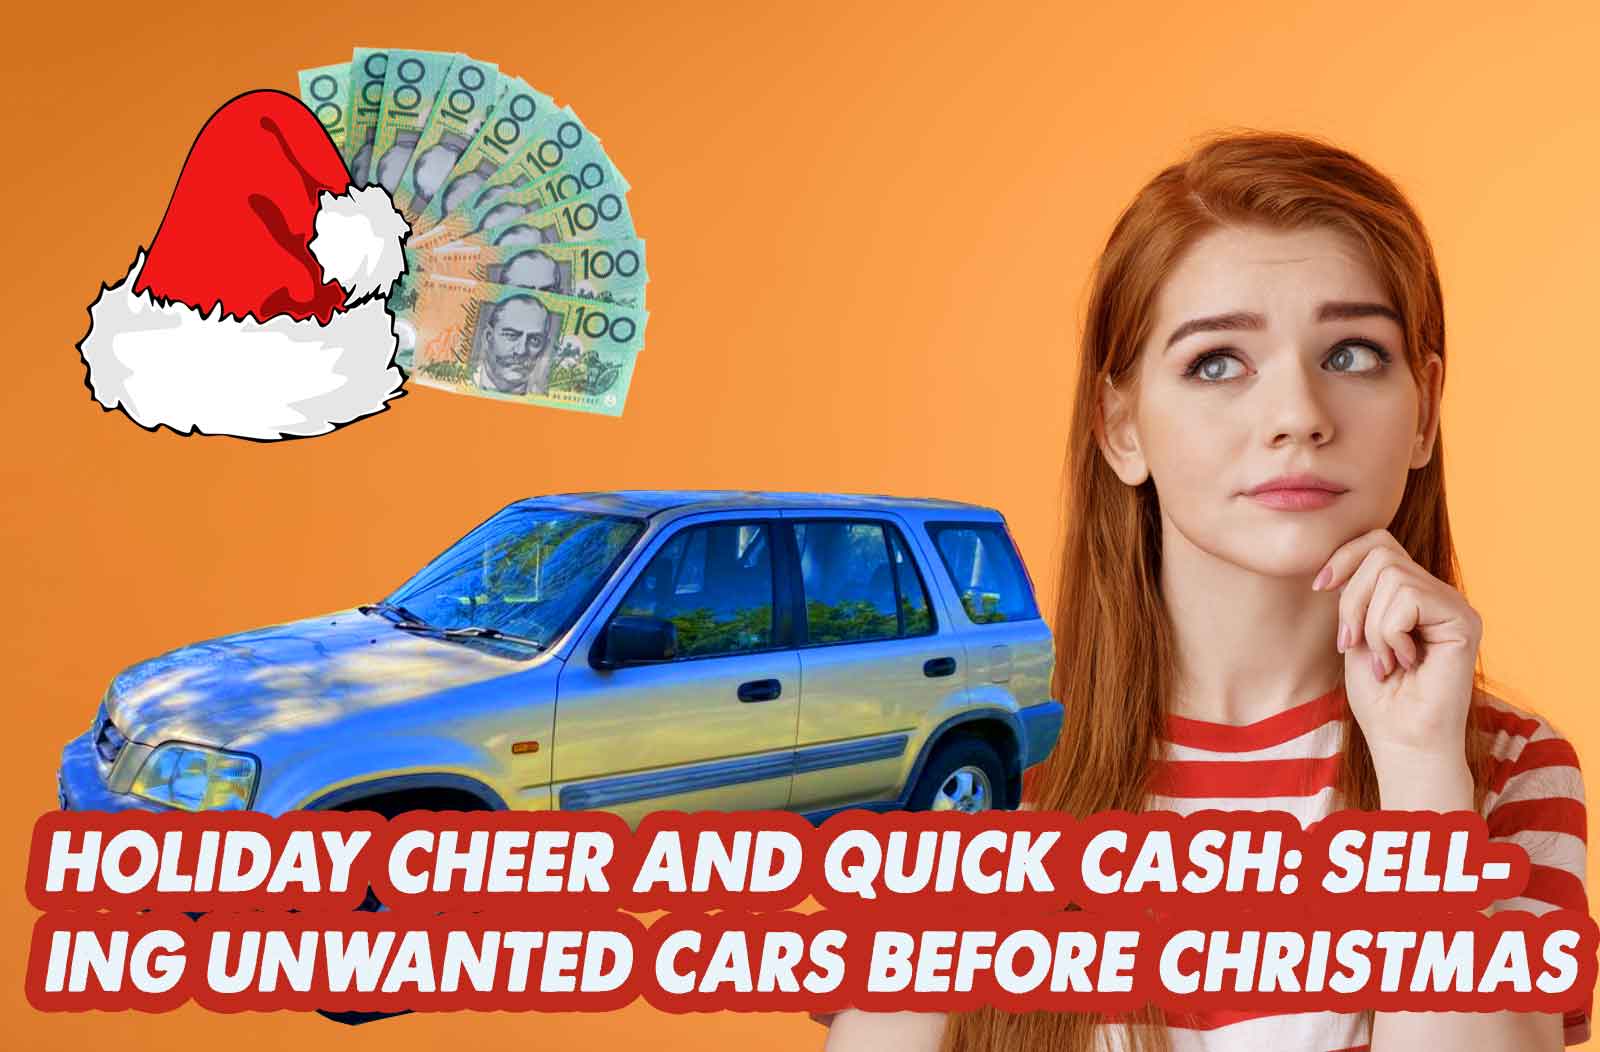 Holiday Cheer and Quick Cash: Selling Unwanted Cars Before Christmas